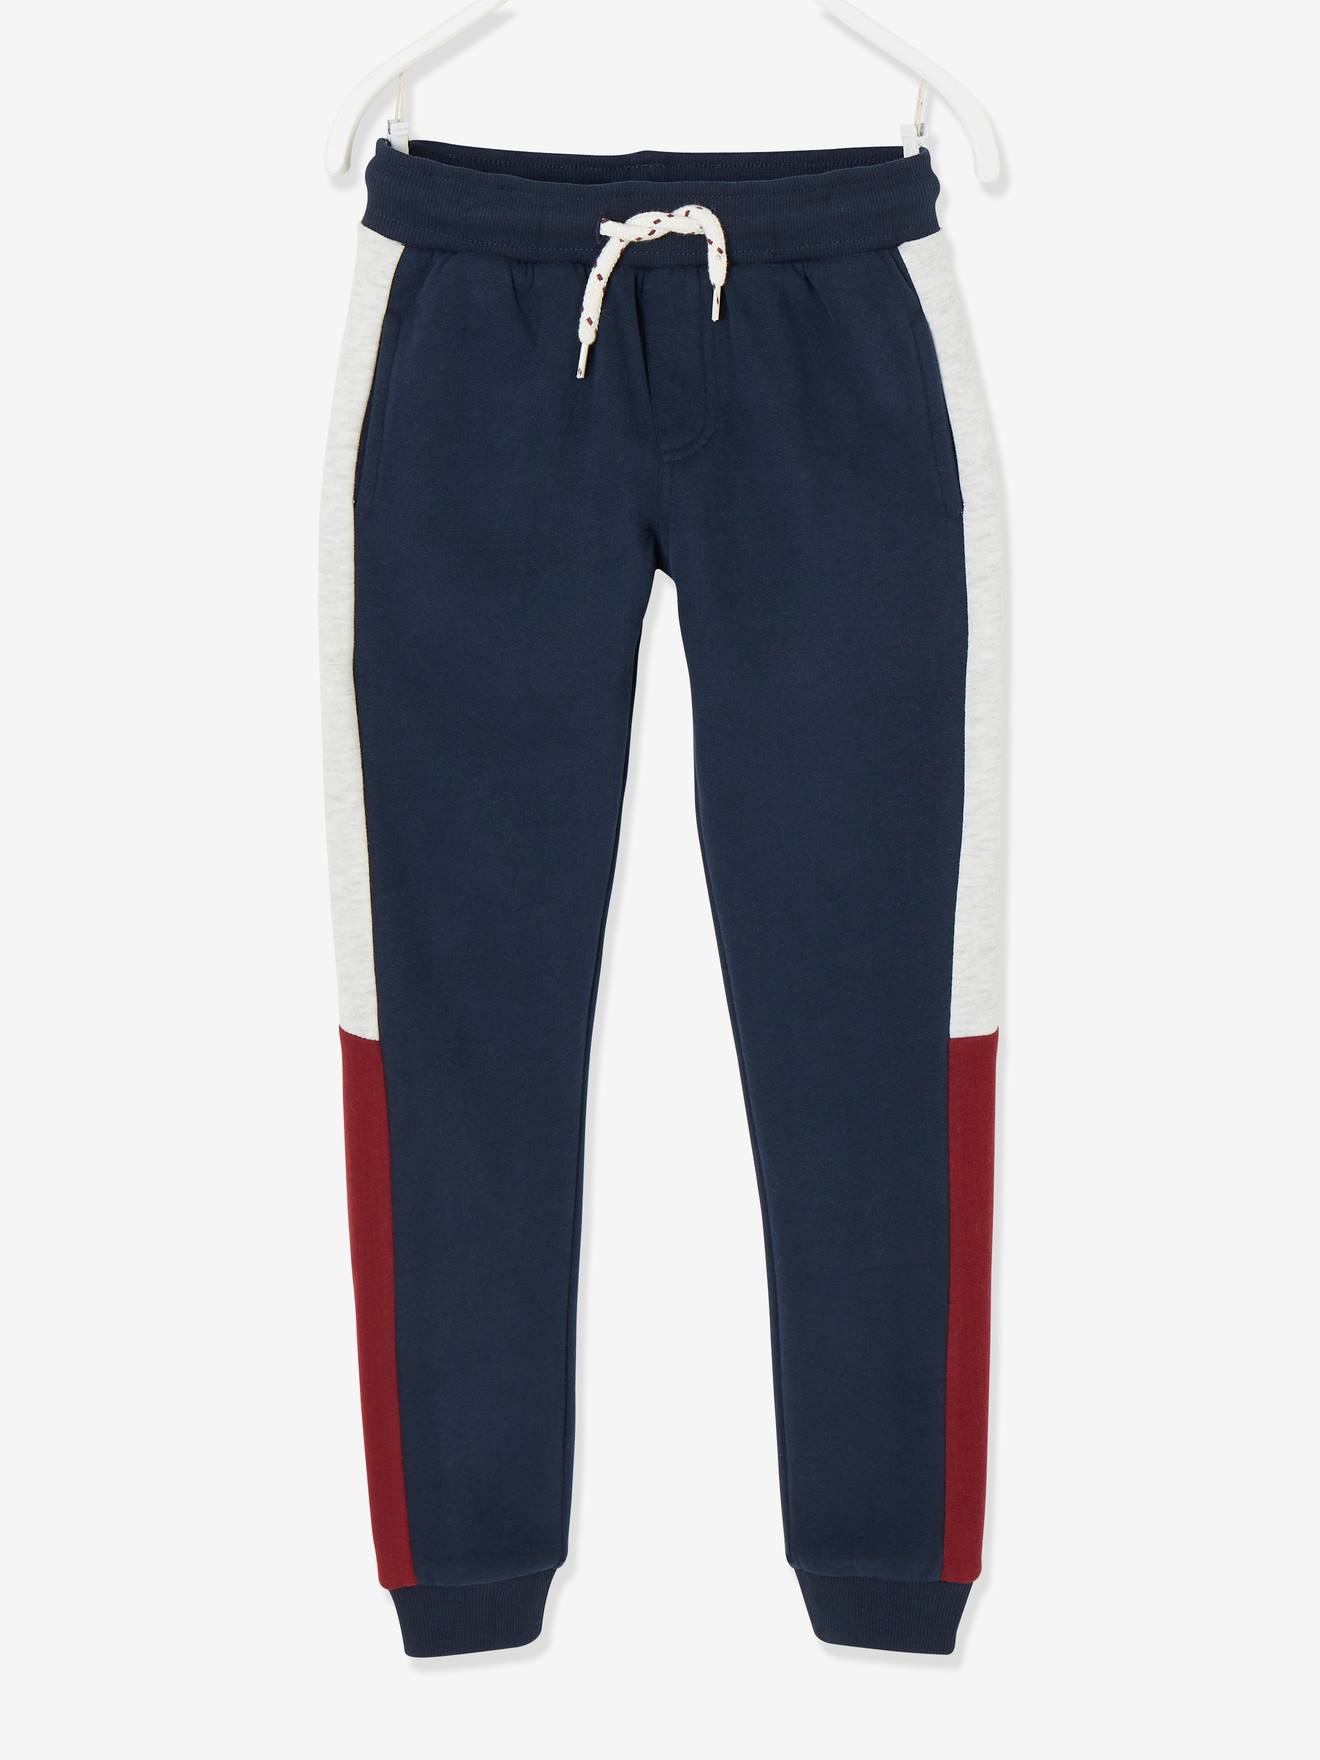 Fleece Trousers with Side Stripes for Boys dark blue